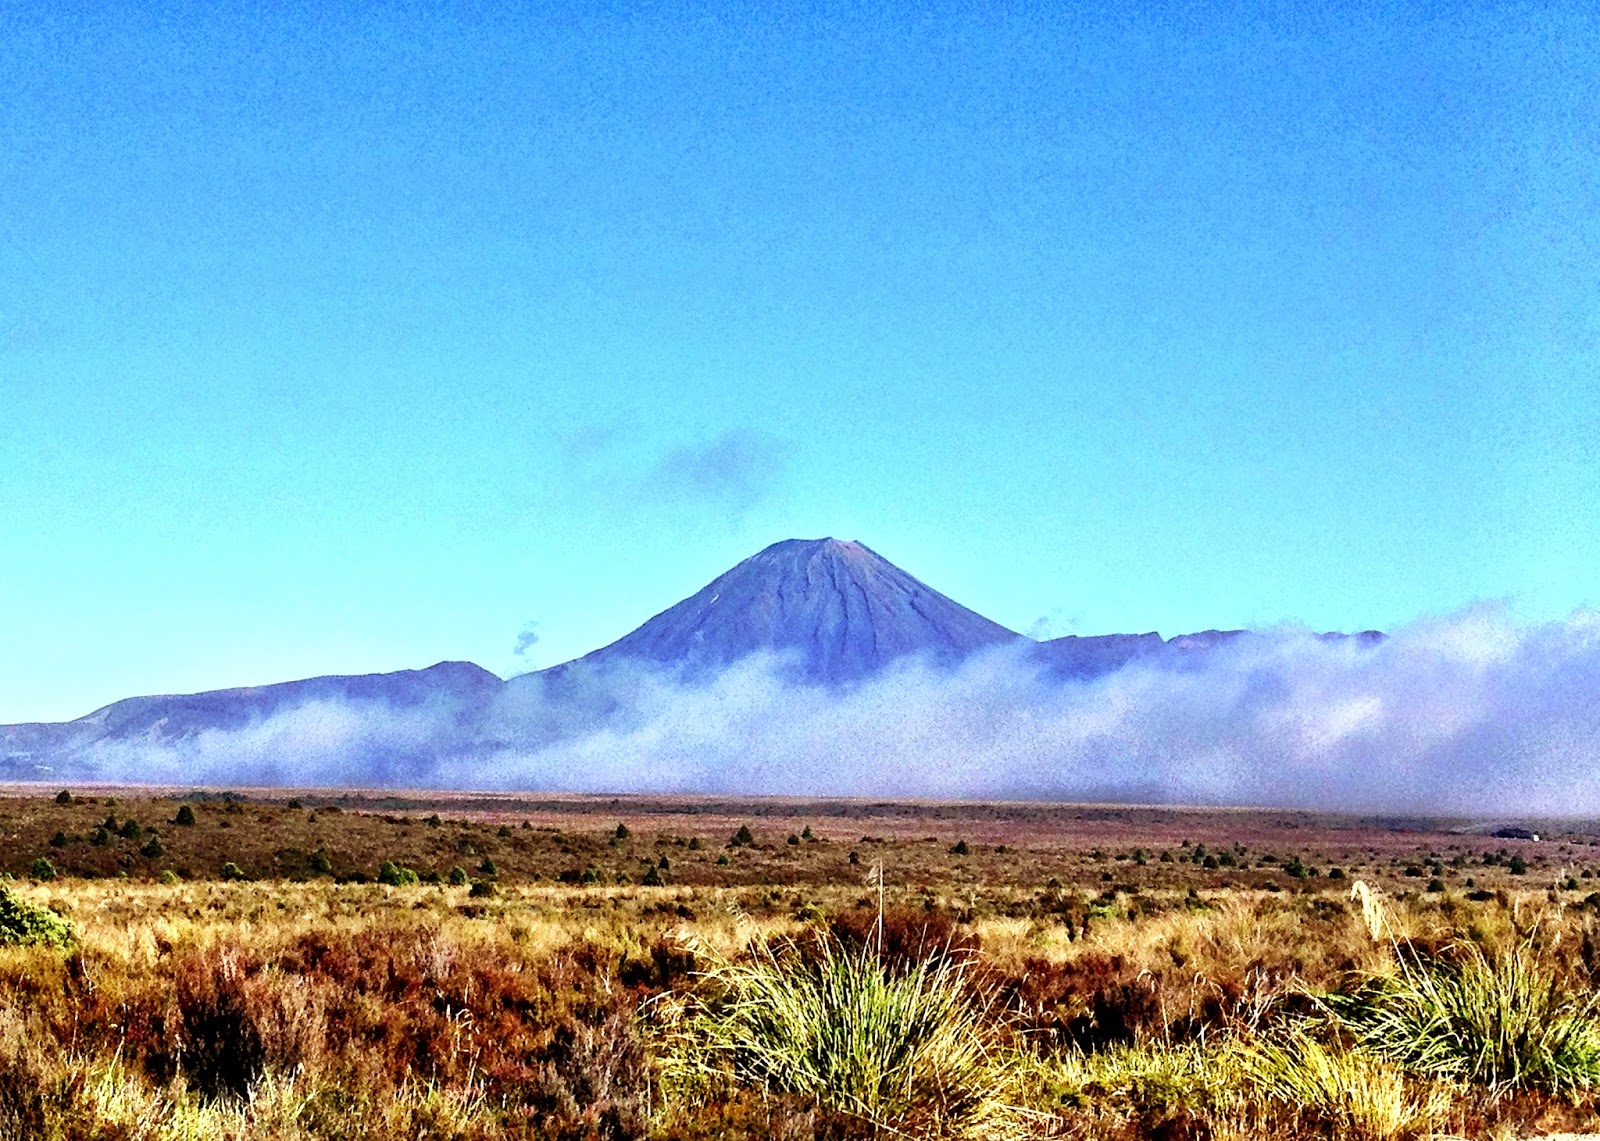 Mount Ngauruhoe from a distance - North Island, New Zealand